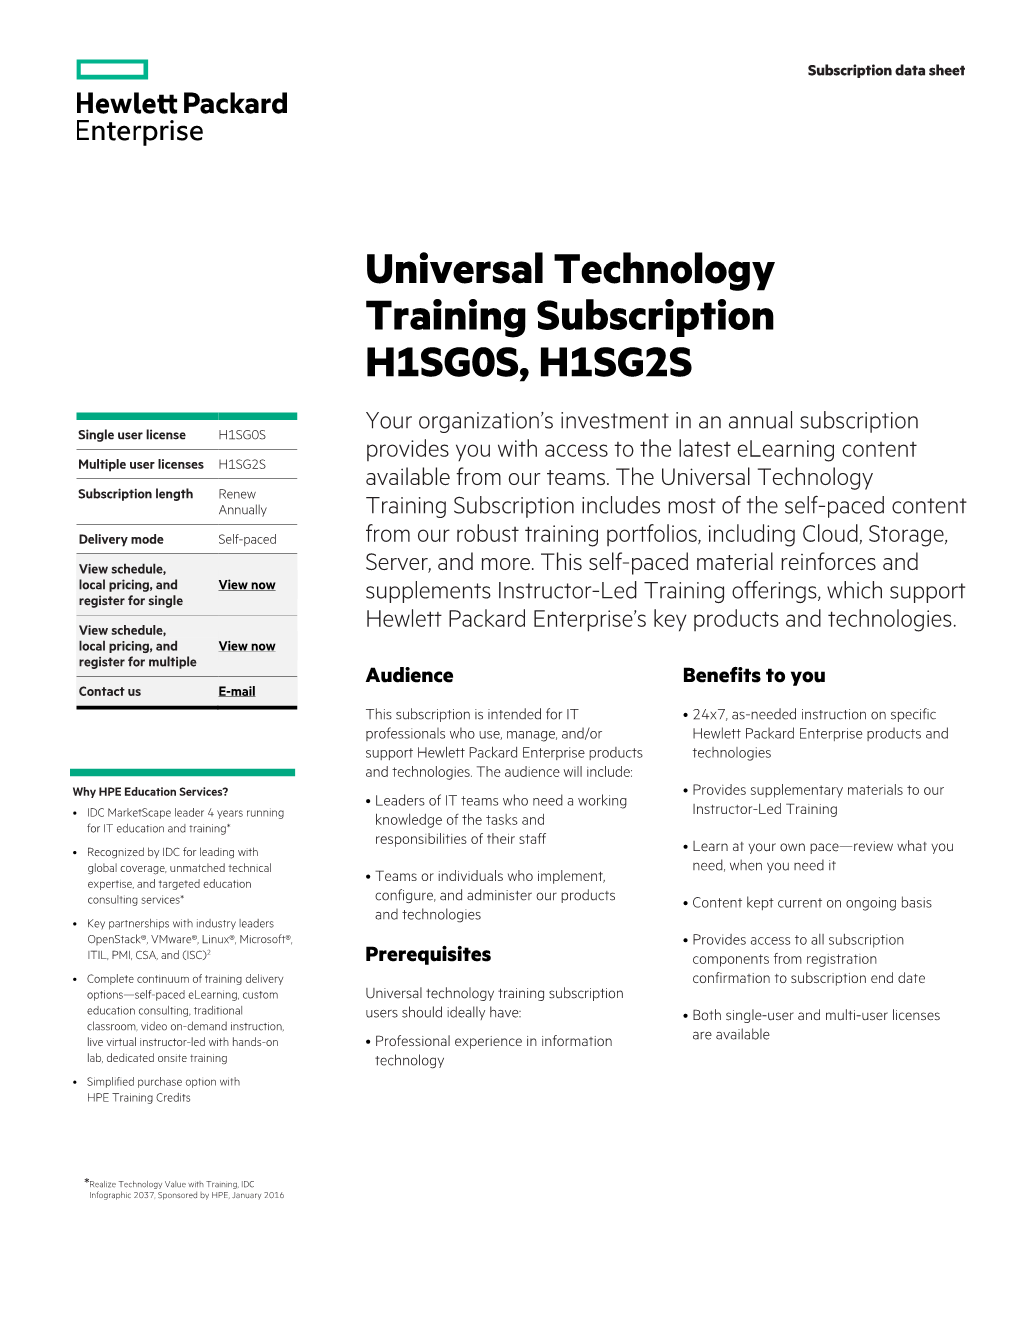 Universal Technology Training Subscription H1SG0S, H1SG2S